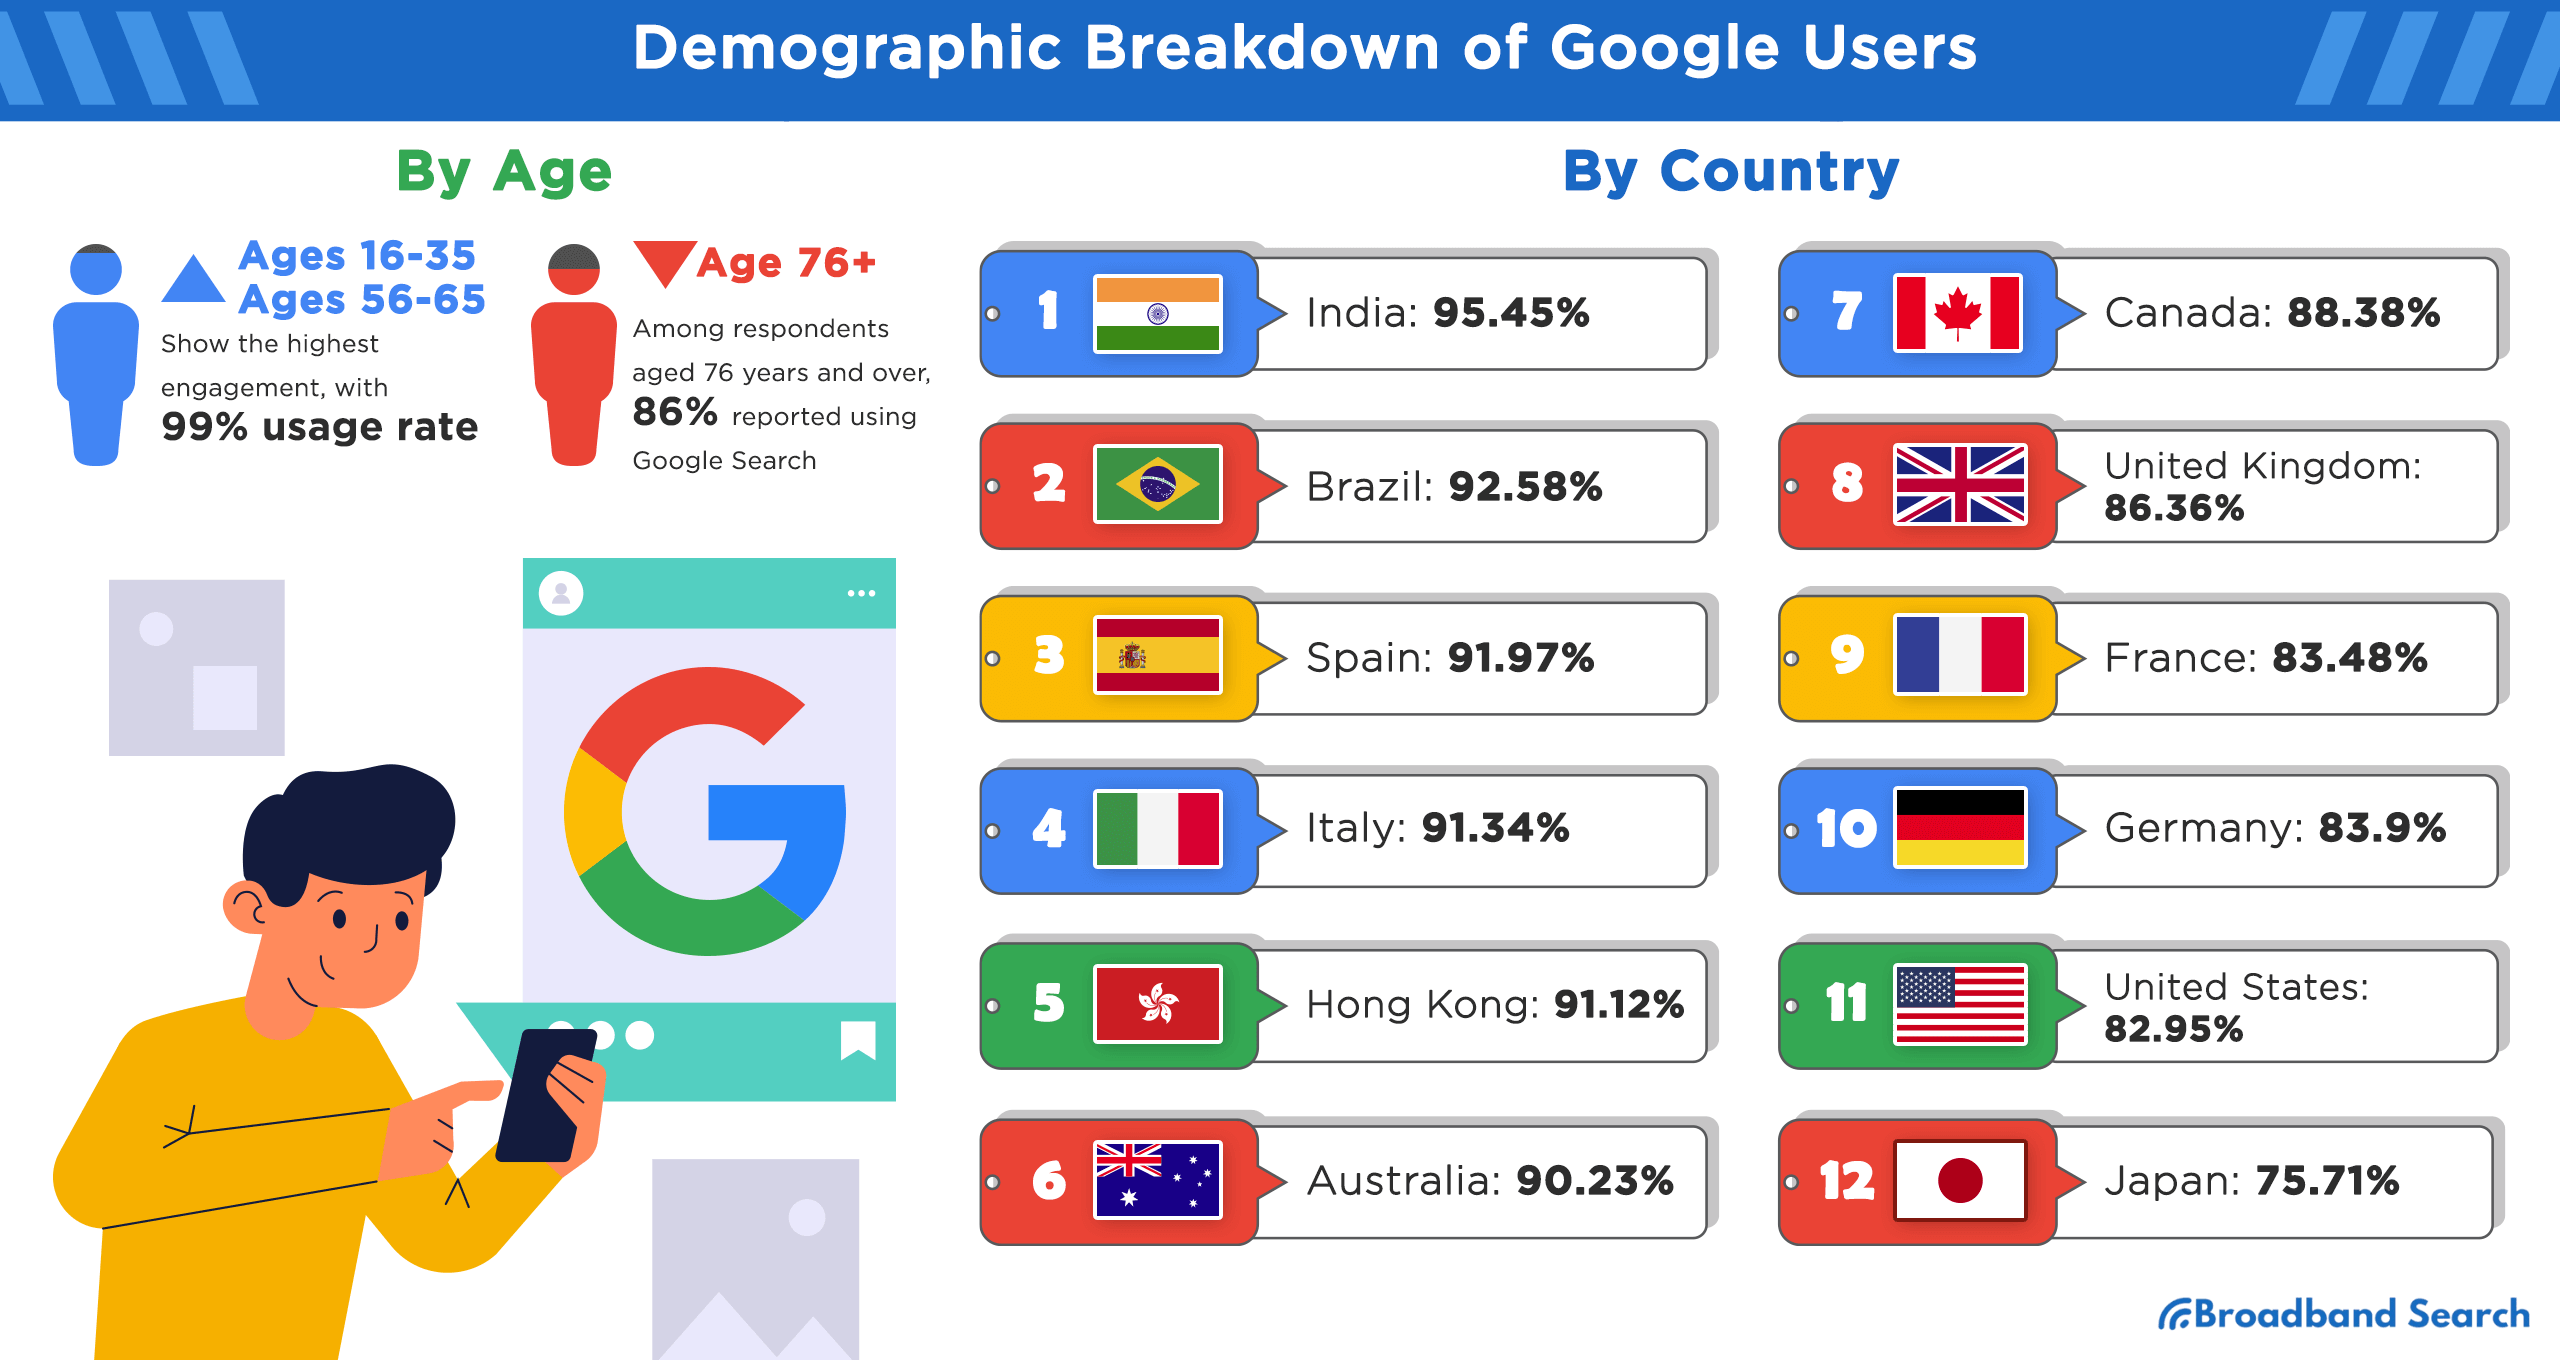 Demographic breakdown of google users by country